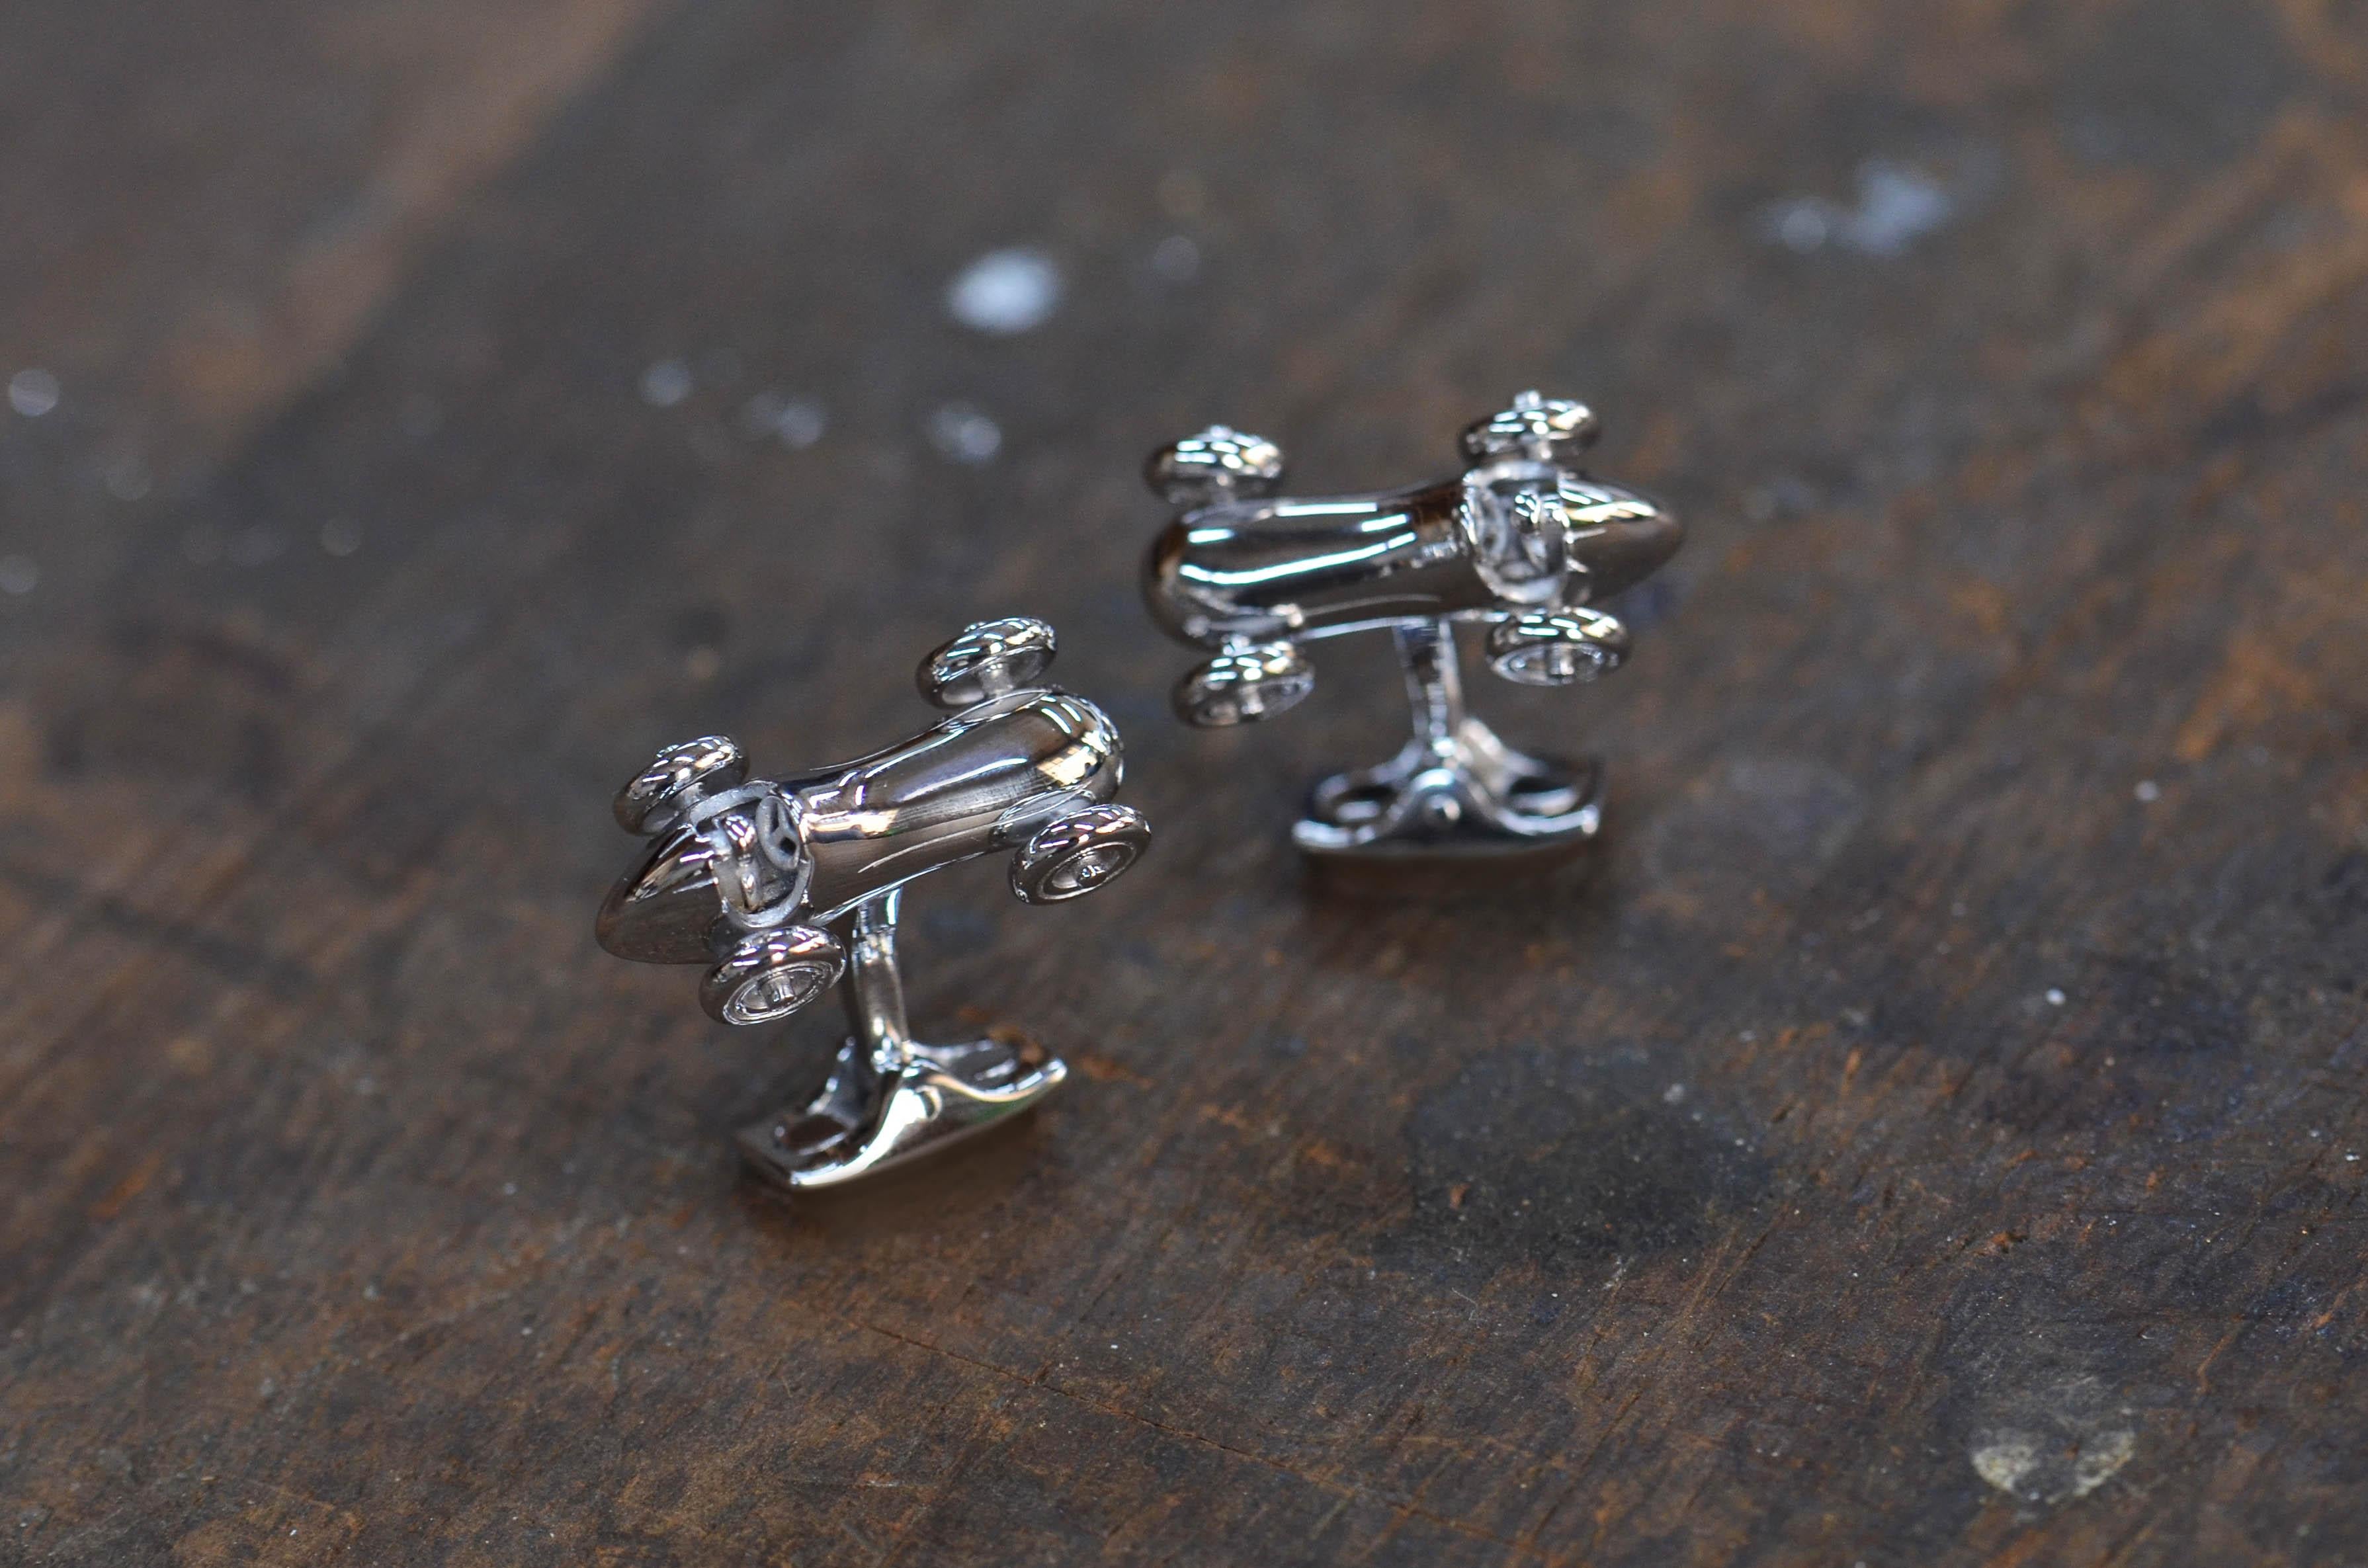 DEAKIN & FRANCIS, Piccadilly Arcade, London

These vintage car cufflinks are sure to move you into pole position by driving you to style victory.

Modelled on the vintage cars of the 1950s, this design features an elongated bonnet and moving wheels